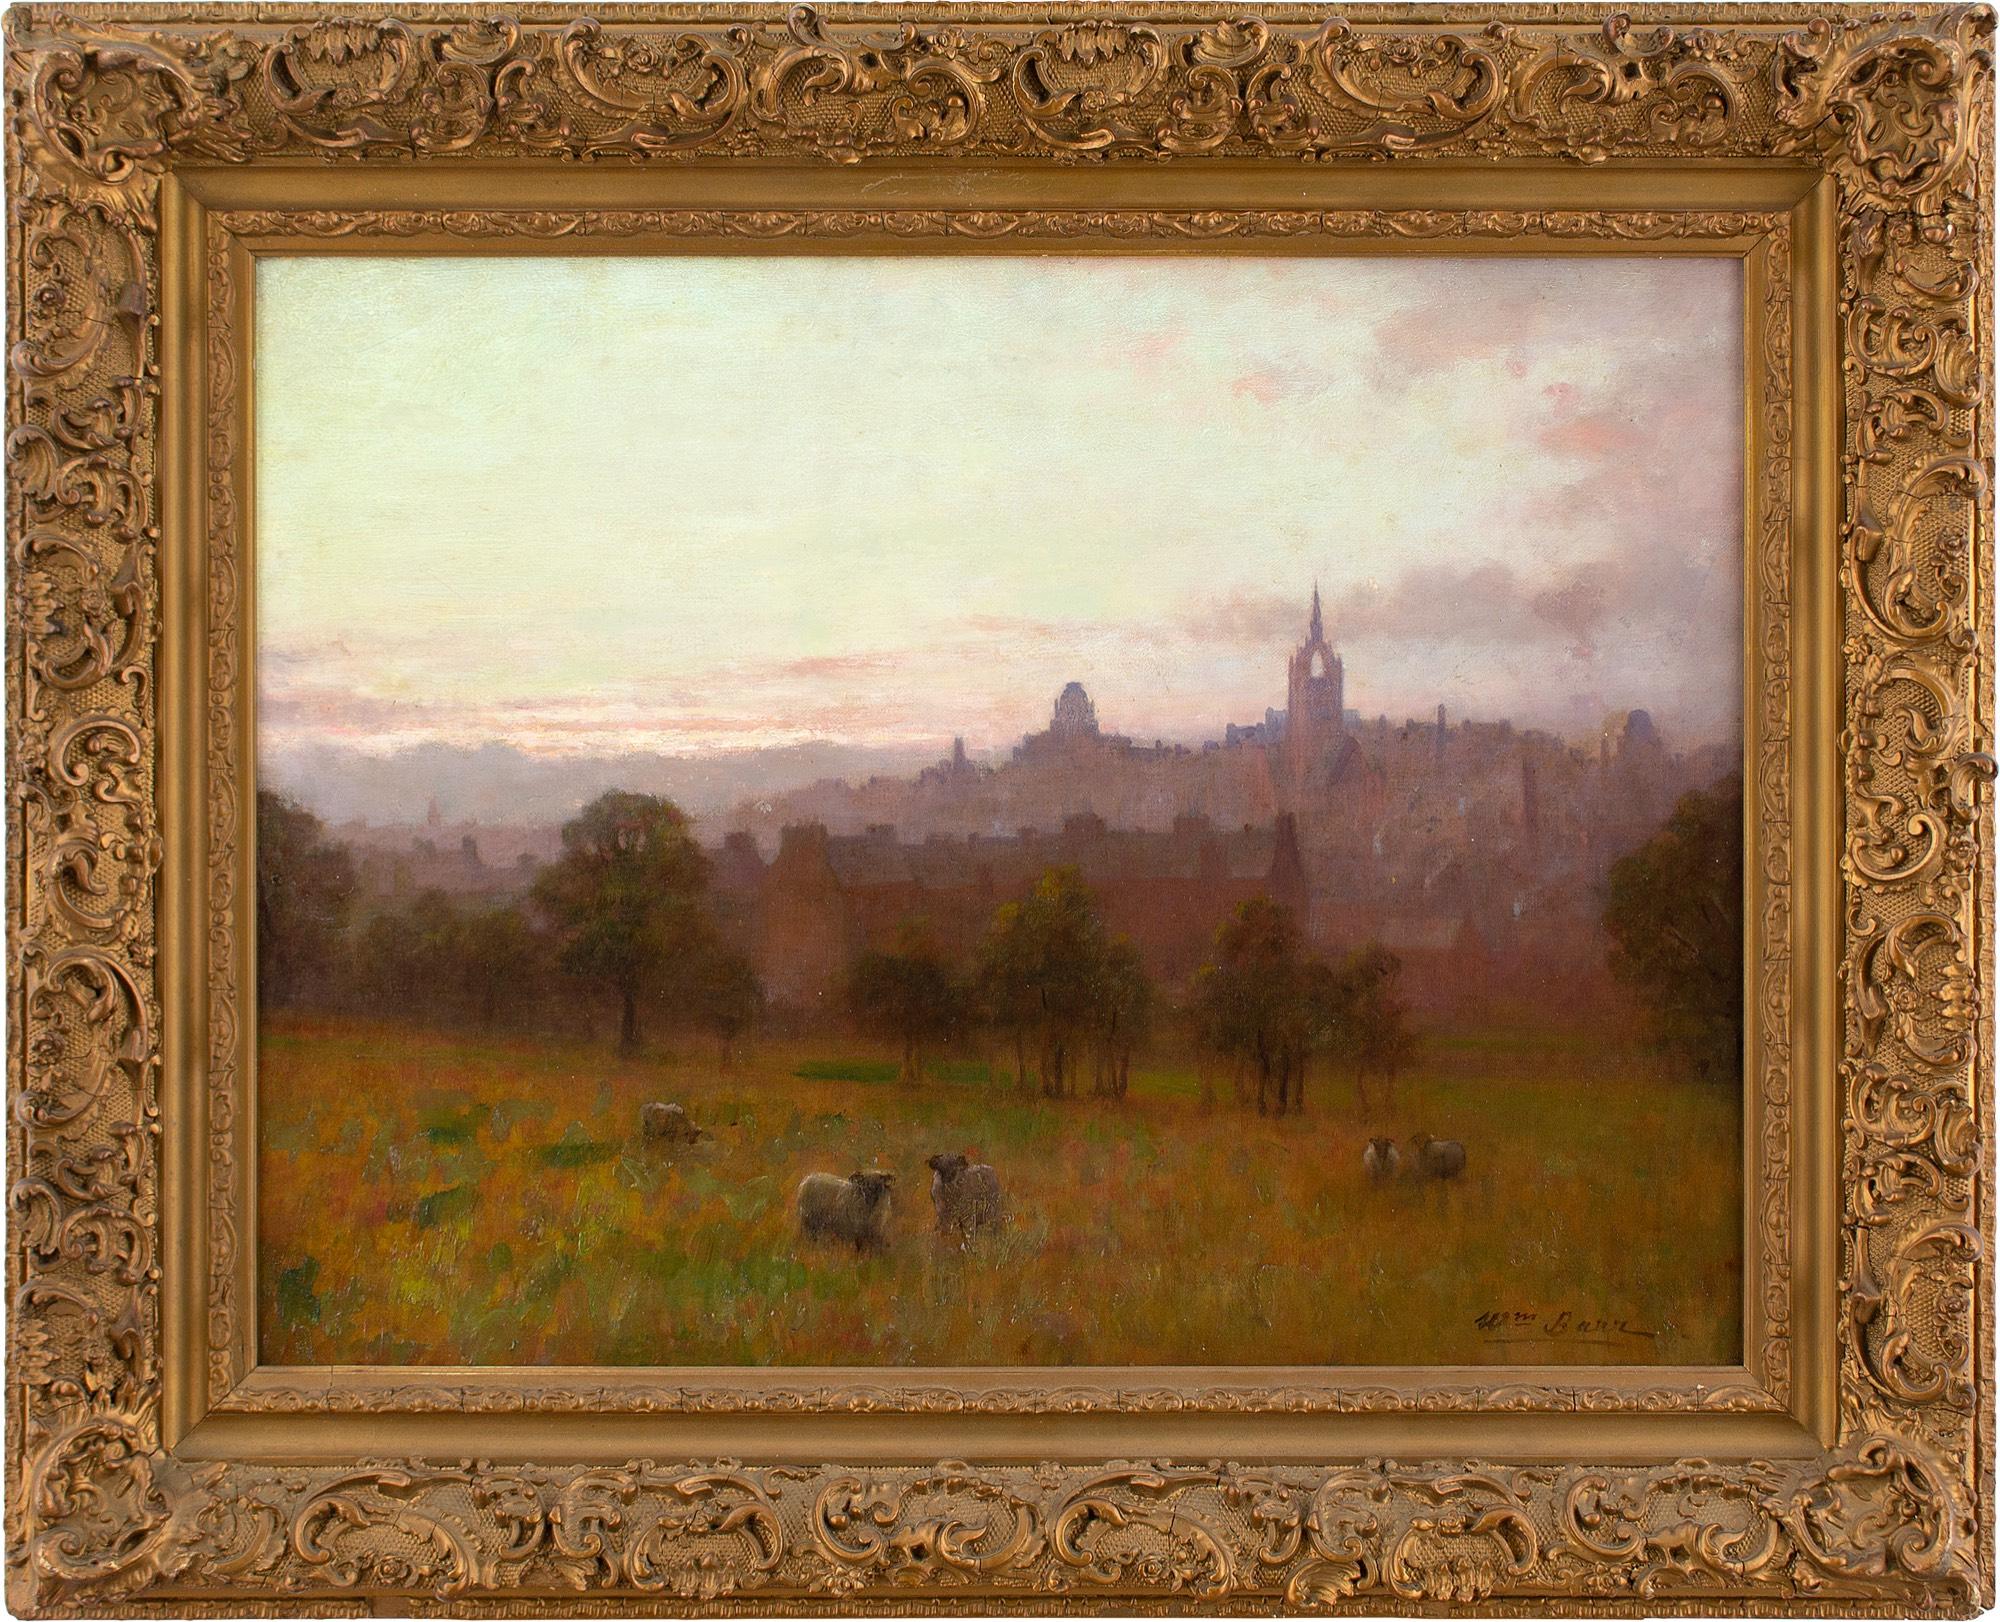 This early 20th-century oil painting by Scottish artist William Barr (1867-1933) depicts the gentle radiance of a sunset over his home town of Paisley in Scotland.

Amid a sleepy haze of pinkish tints, the gothic-revival steeple of Coats Paisley